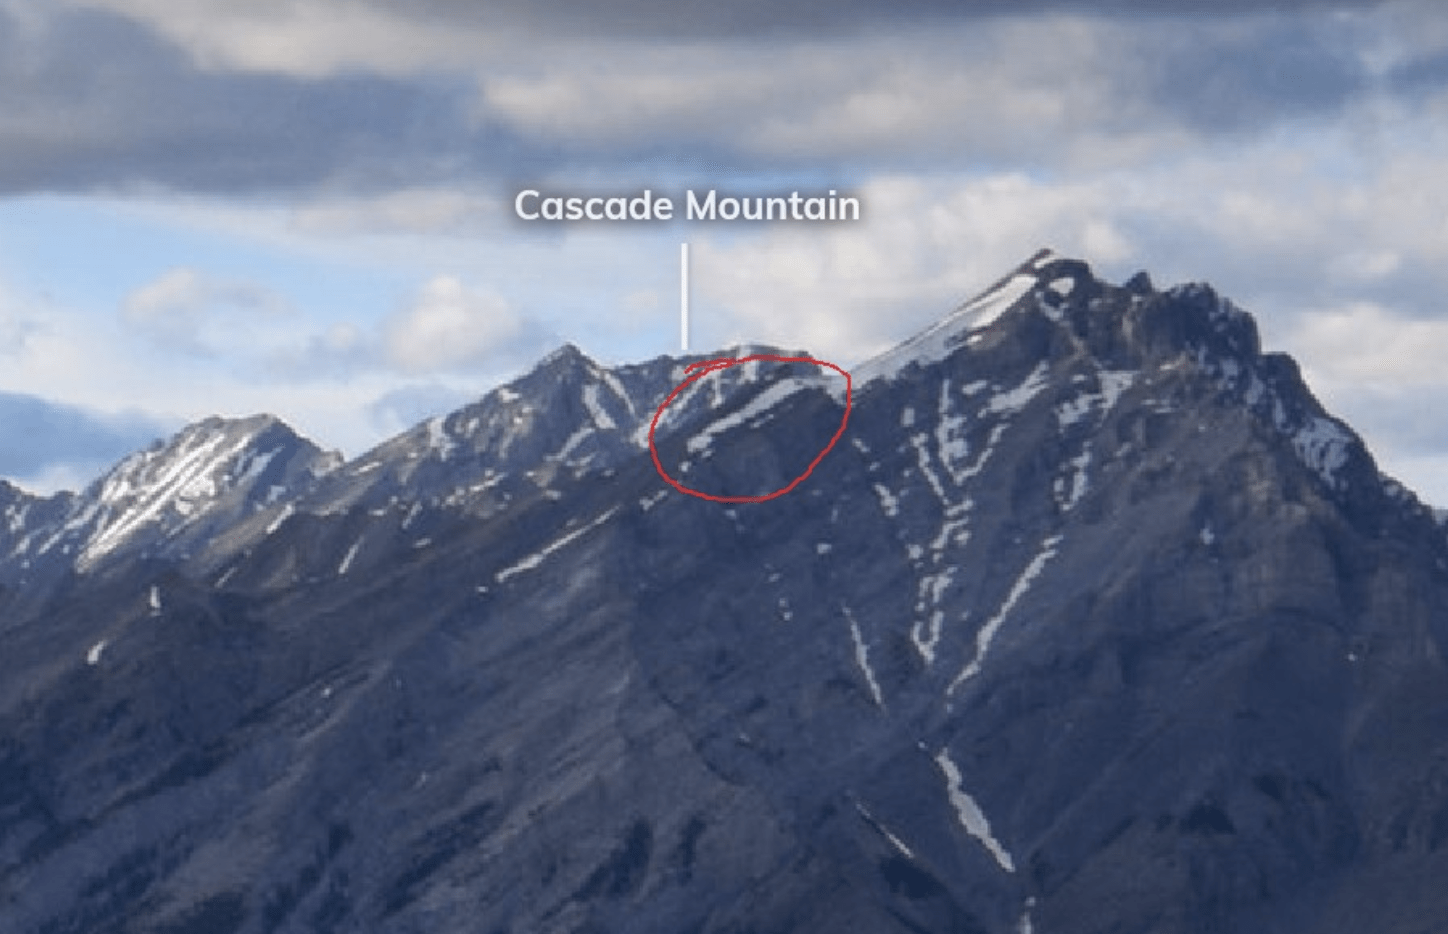 Photo of cascade mountain indicating key element of route